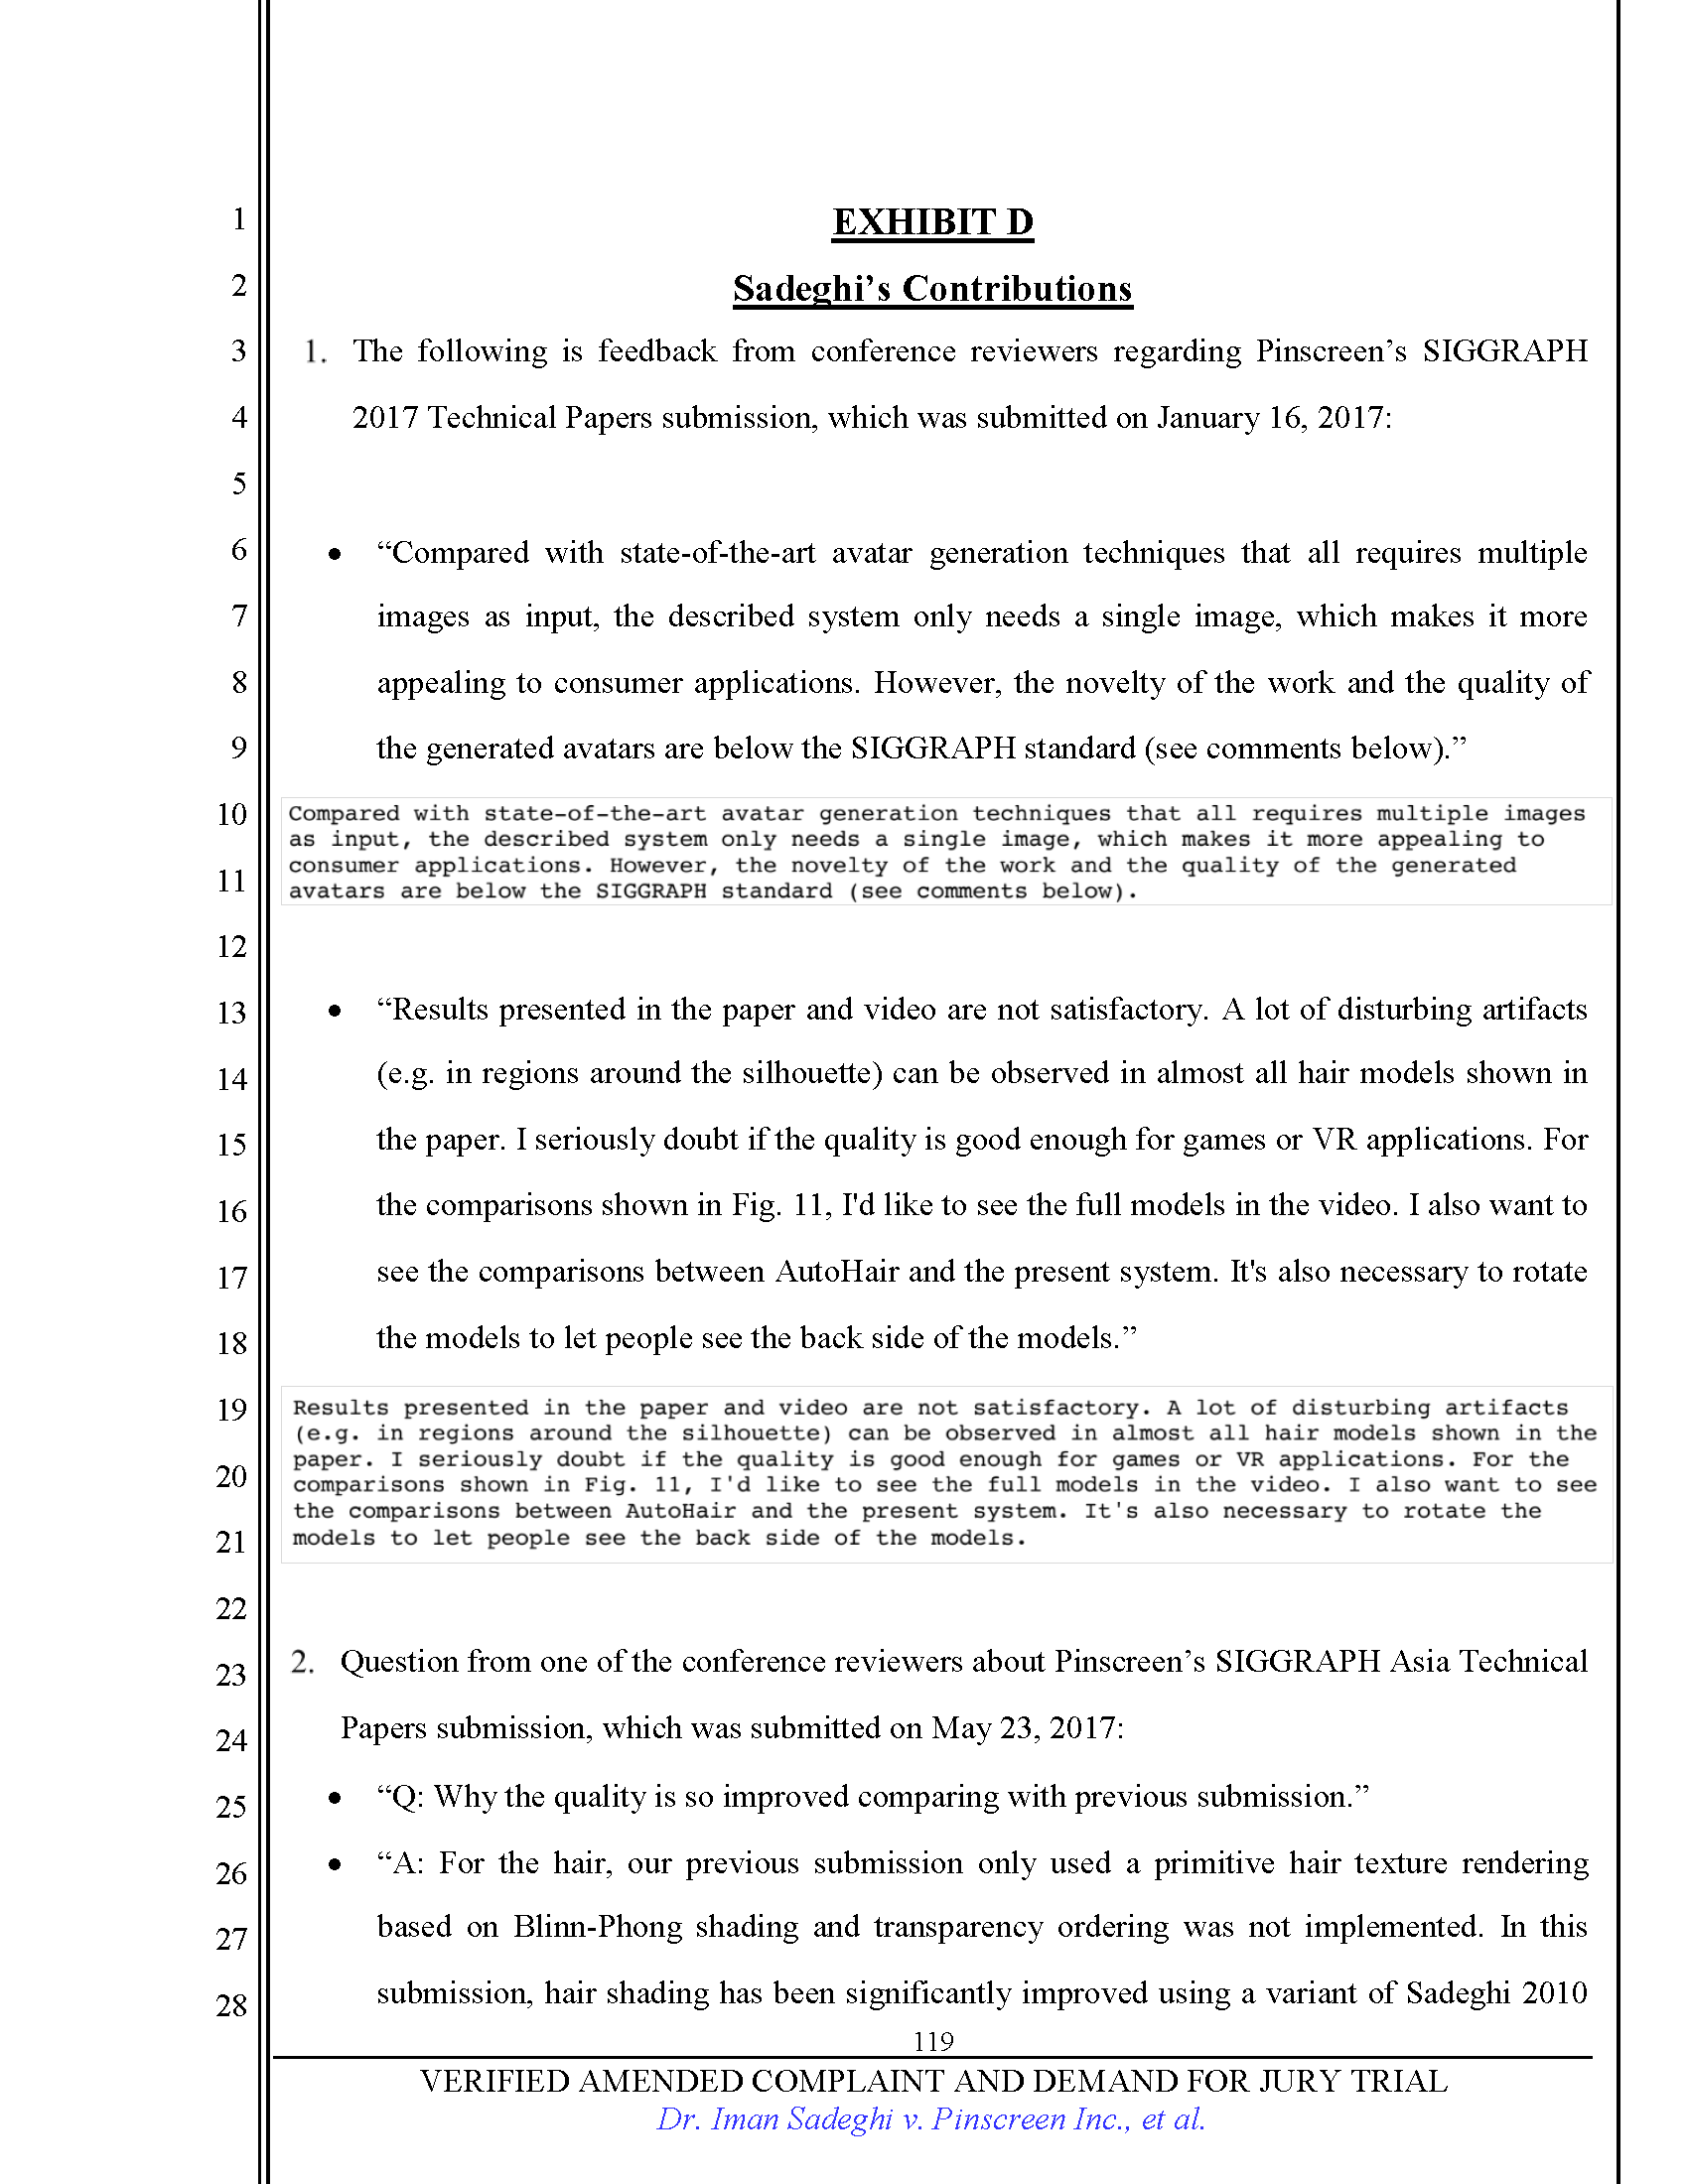 First Amended Complaint (FAC) Page 119